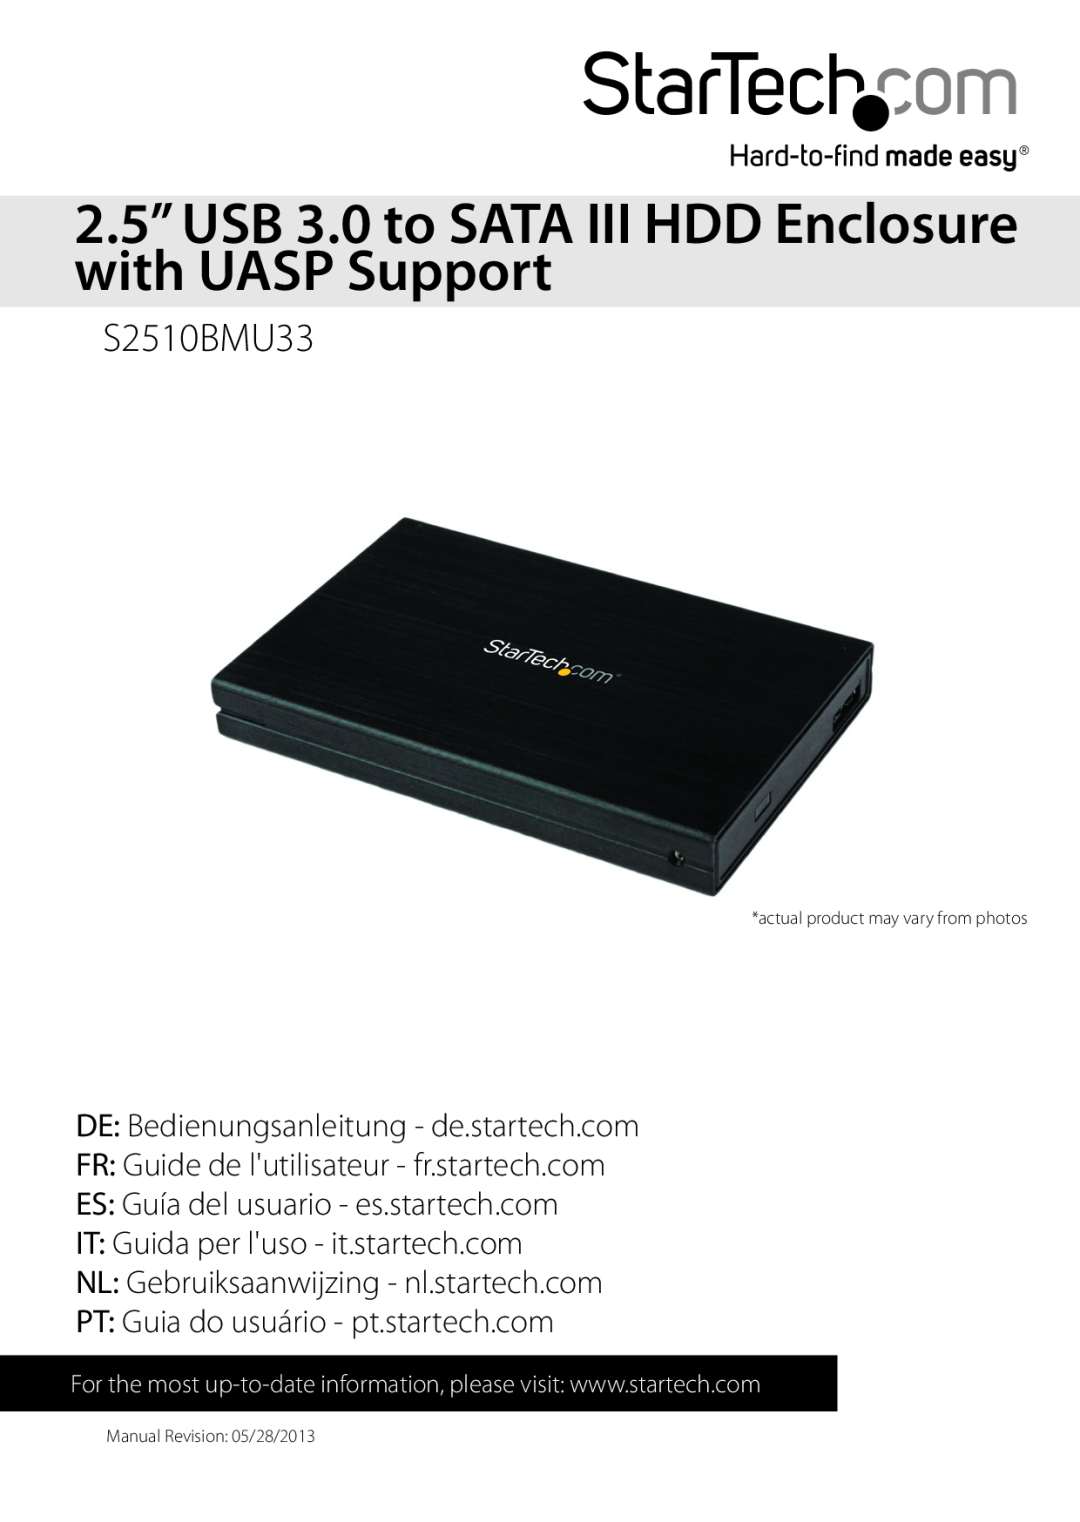 StarTech.com S2510BMU33 manual 2.5” USB 3.0 to SATA III HDD Enclosure with UASP Support, Manual Revision 05/28/2013 